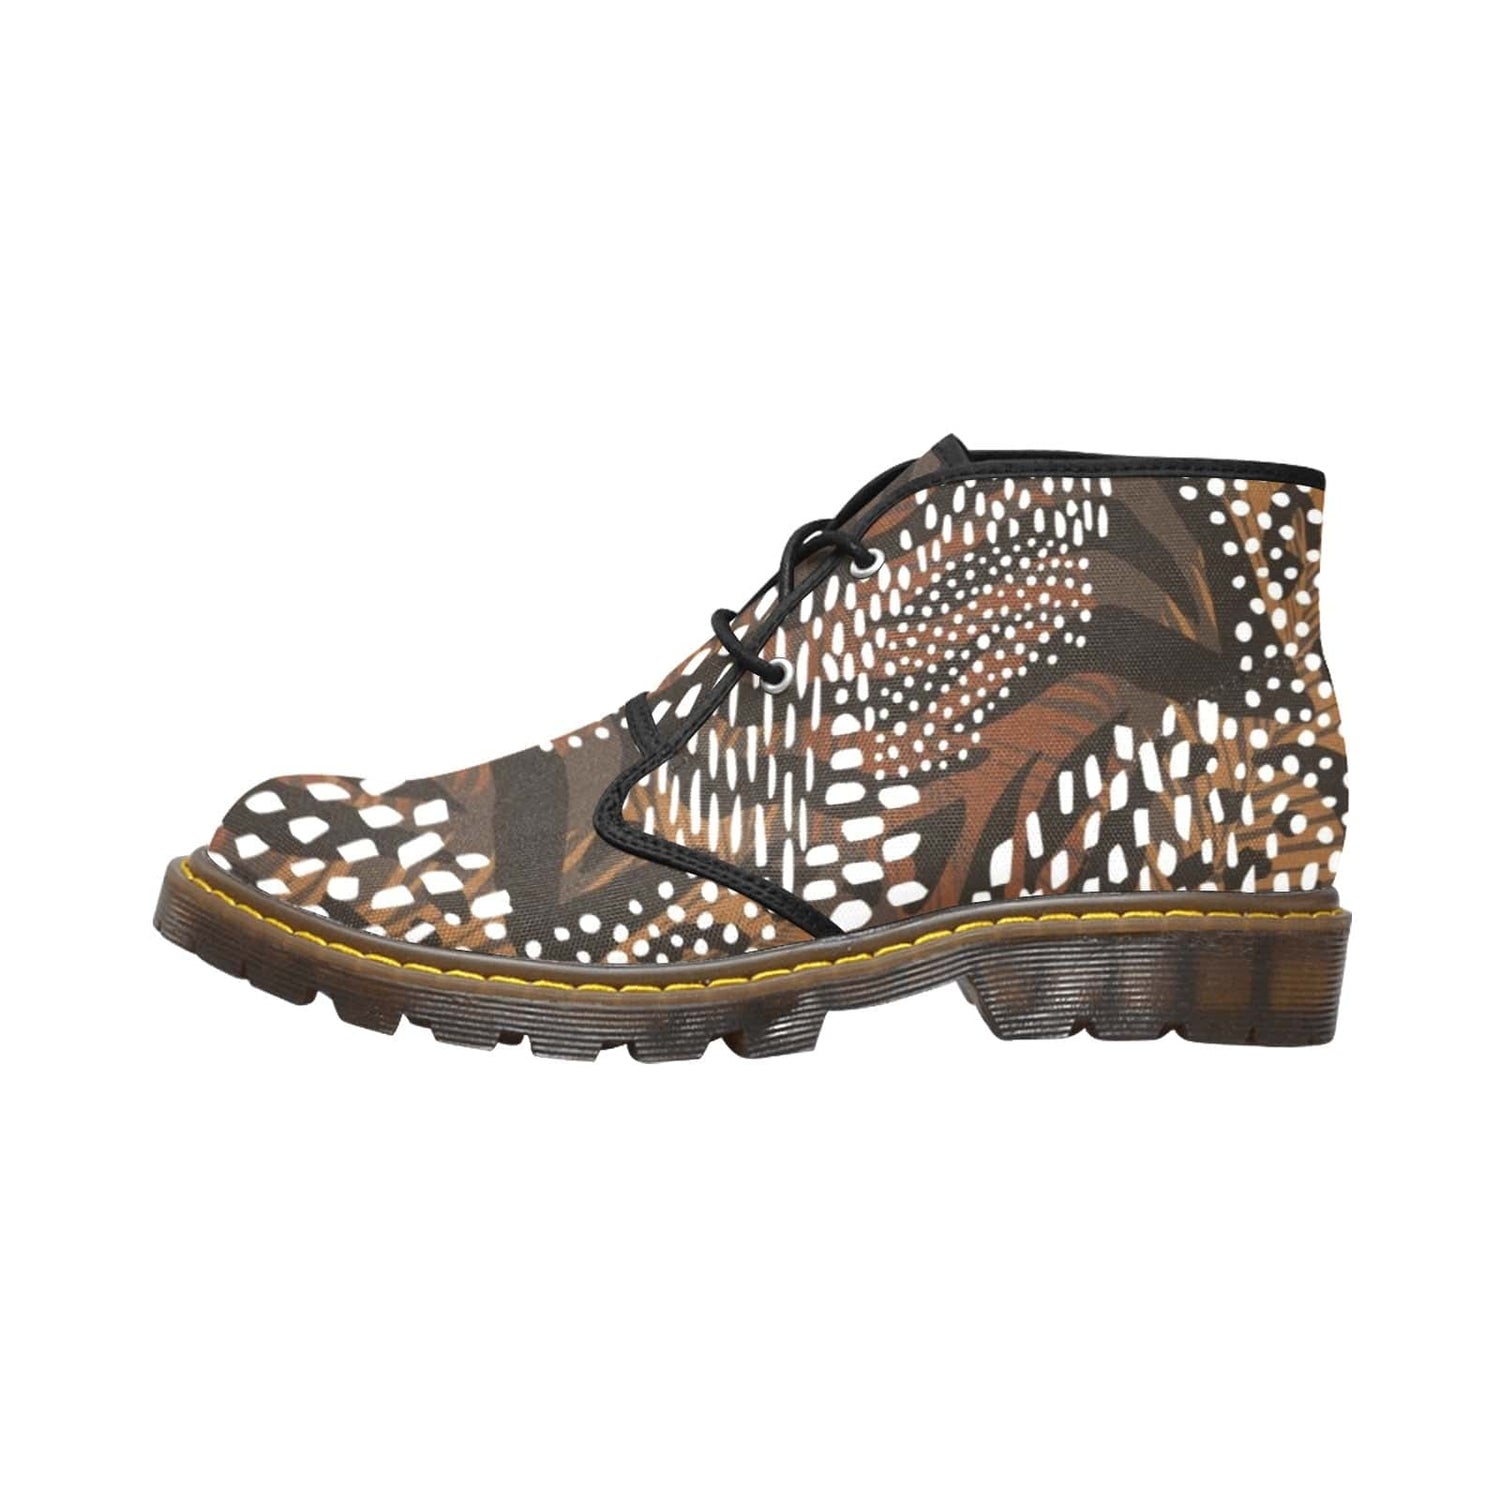 Exotic Jungle Print Hipster Groovy Boots For Women Boots